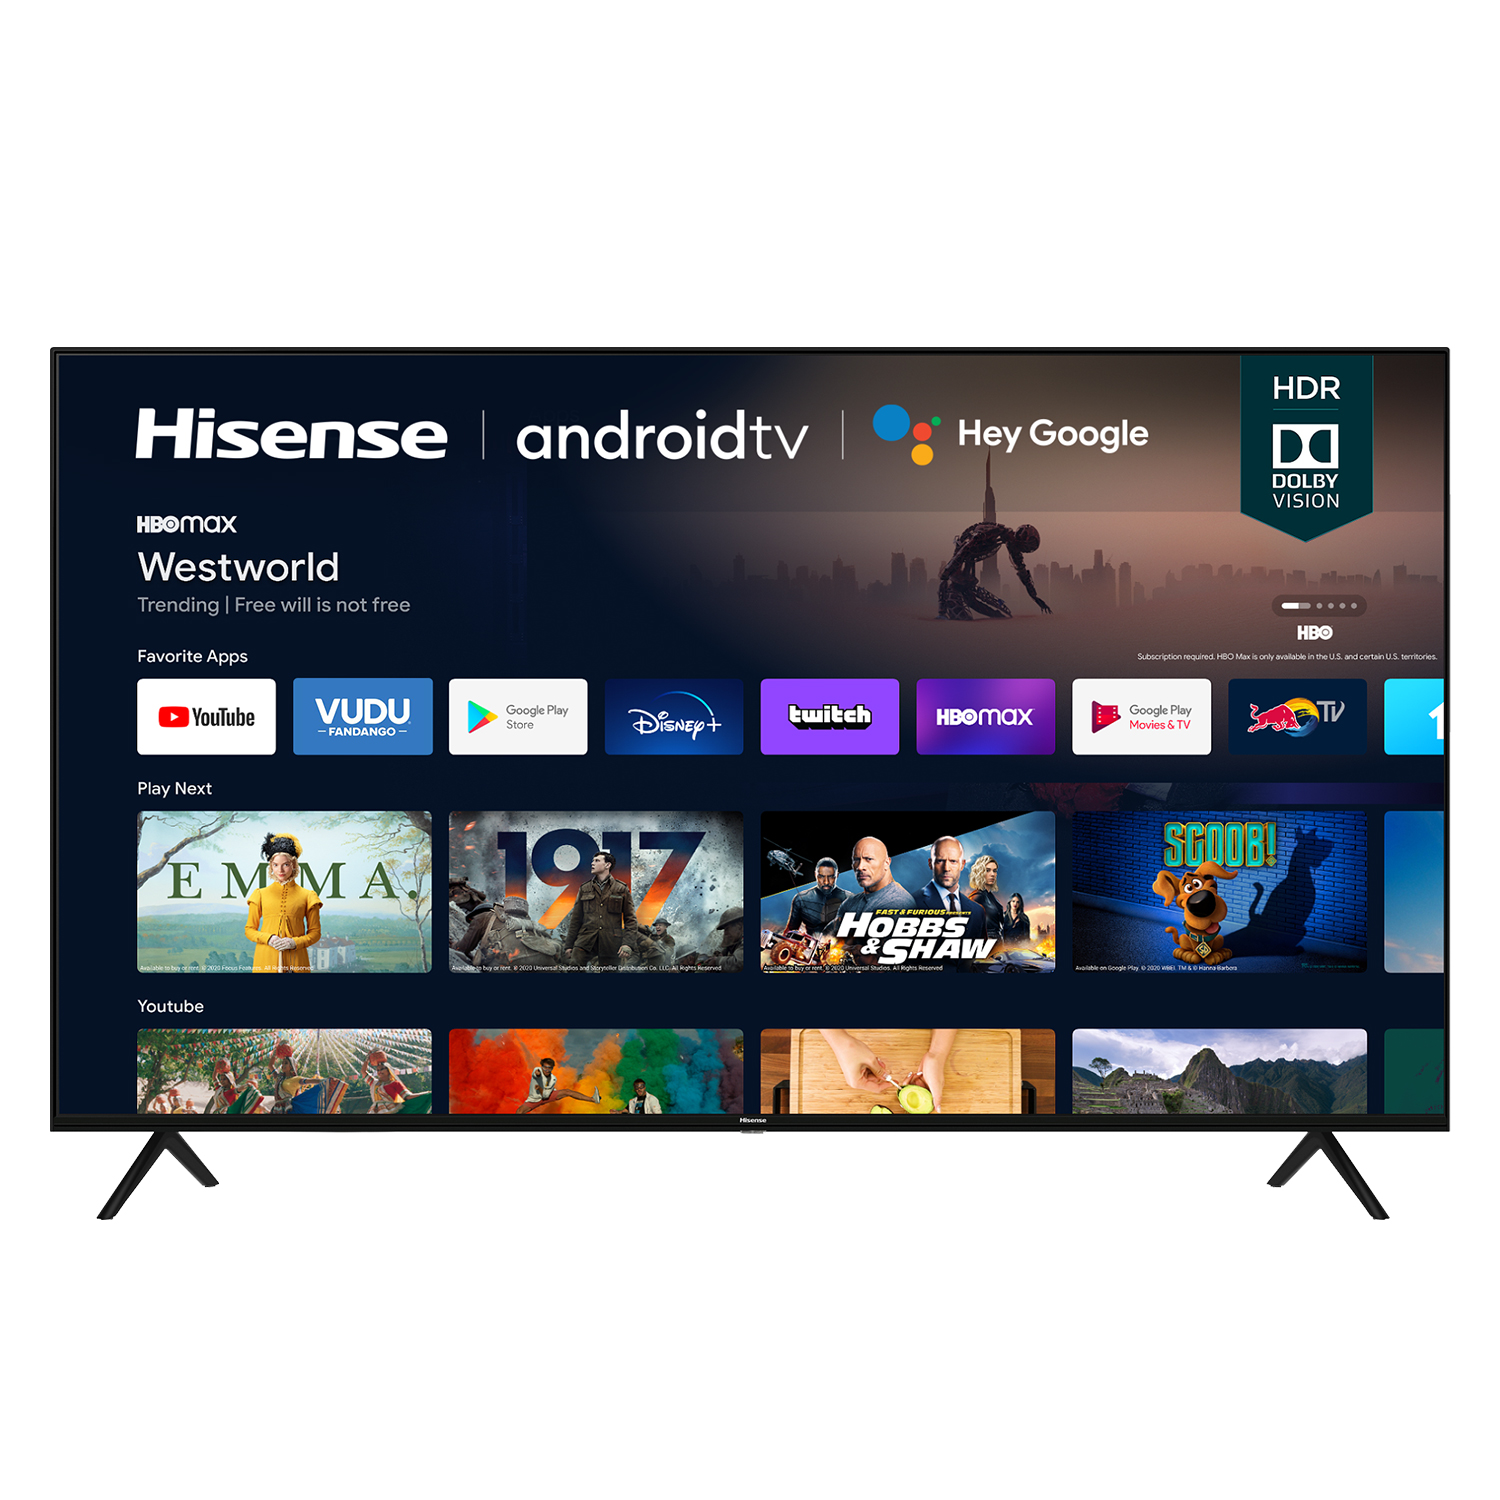 Hisense 70" Class 4K Ultra HD Android Smart TV A6G Series 70A6G3 - image 1 of 19